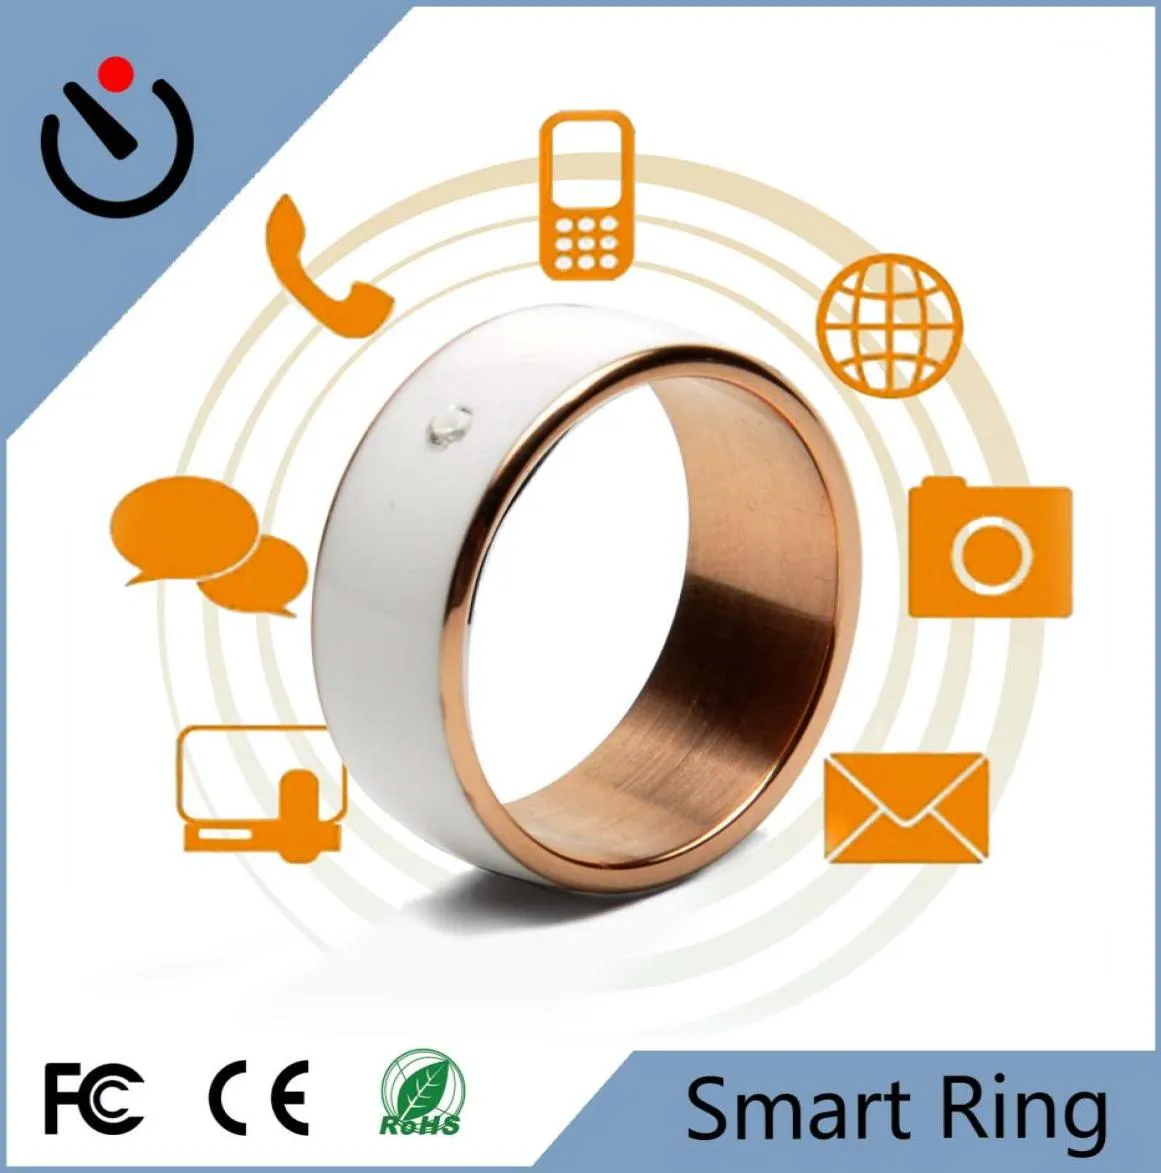 Smart Ring NFC Android WP Smart Electronics Smart Devices Intelligent Magic As Mobiles Camara Detector Mp31783238